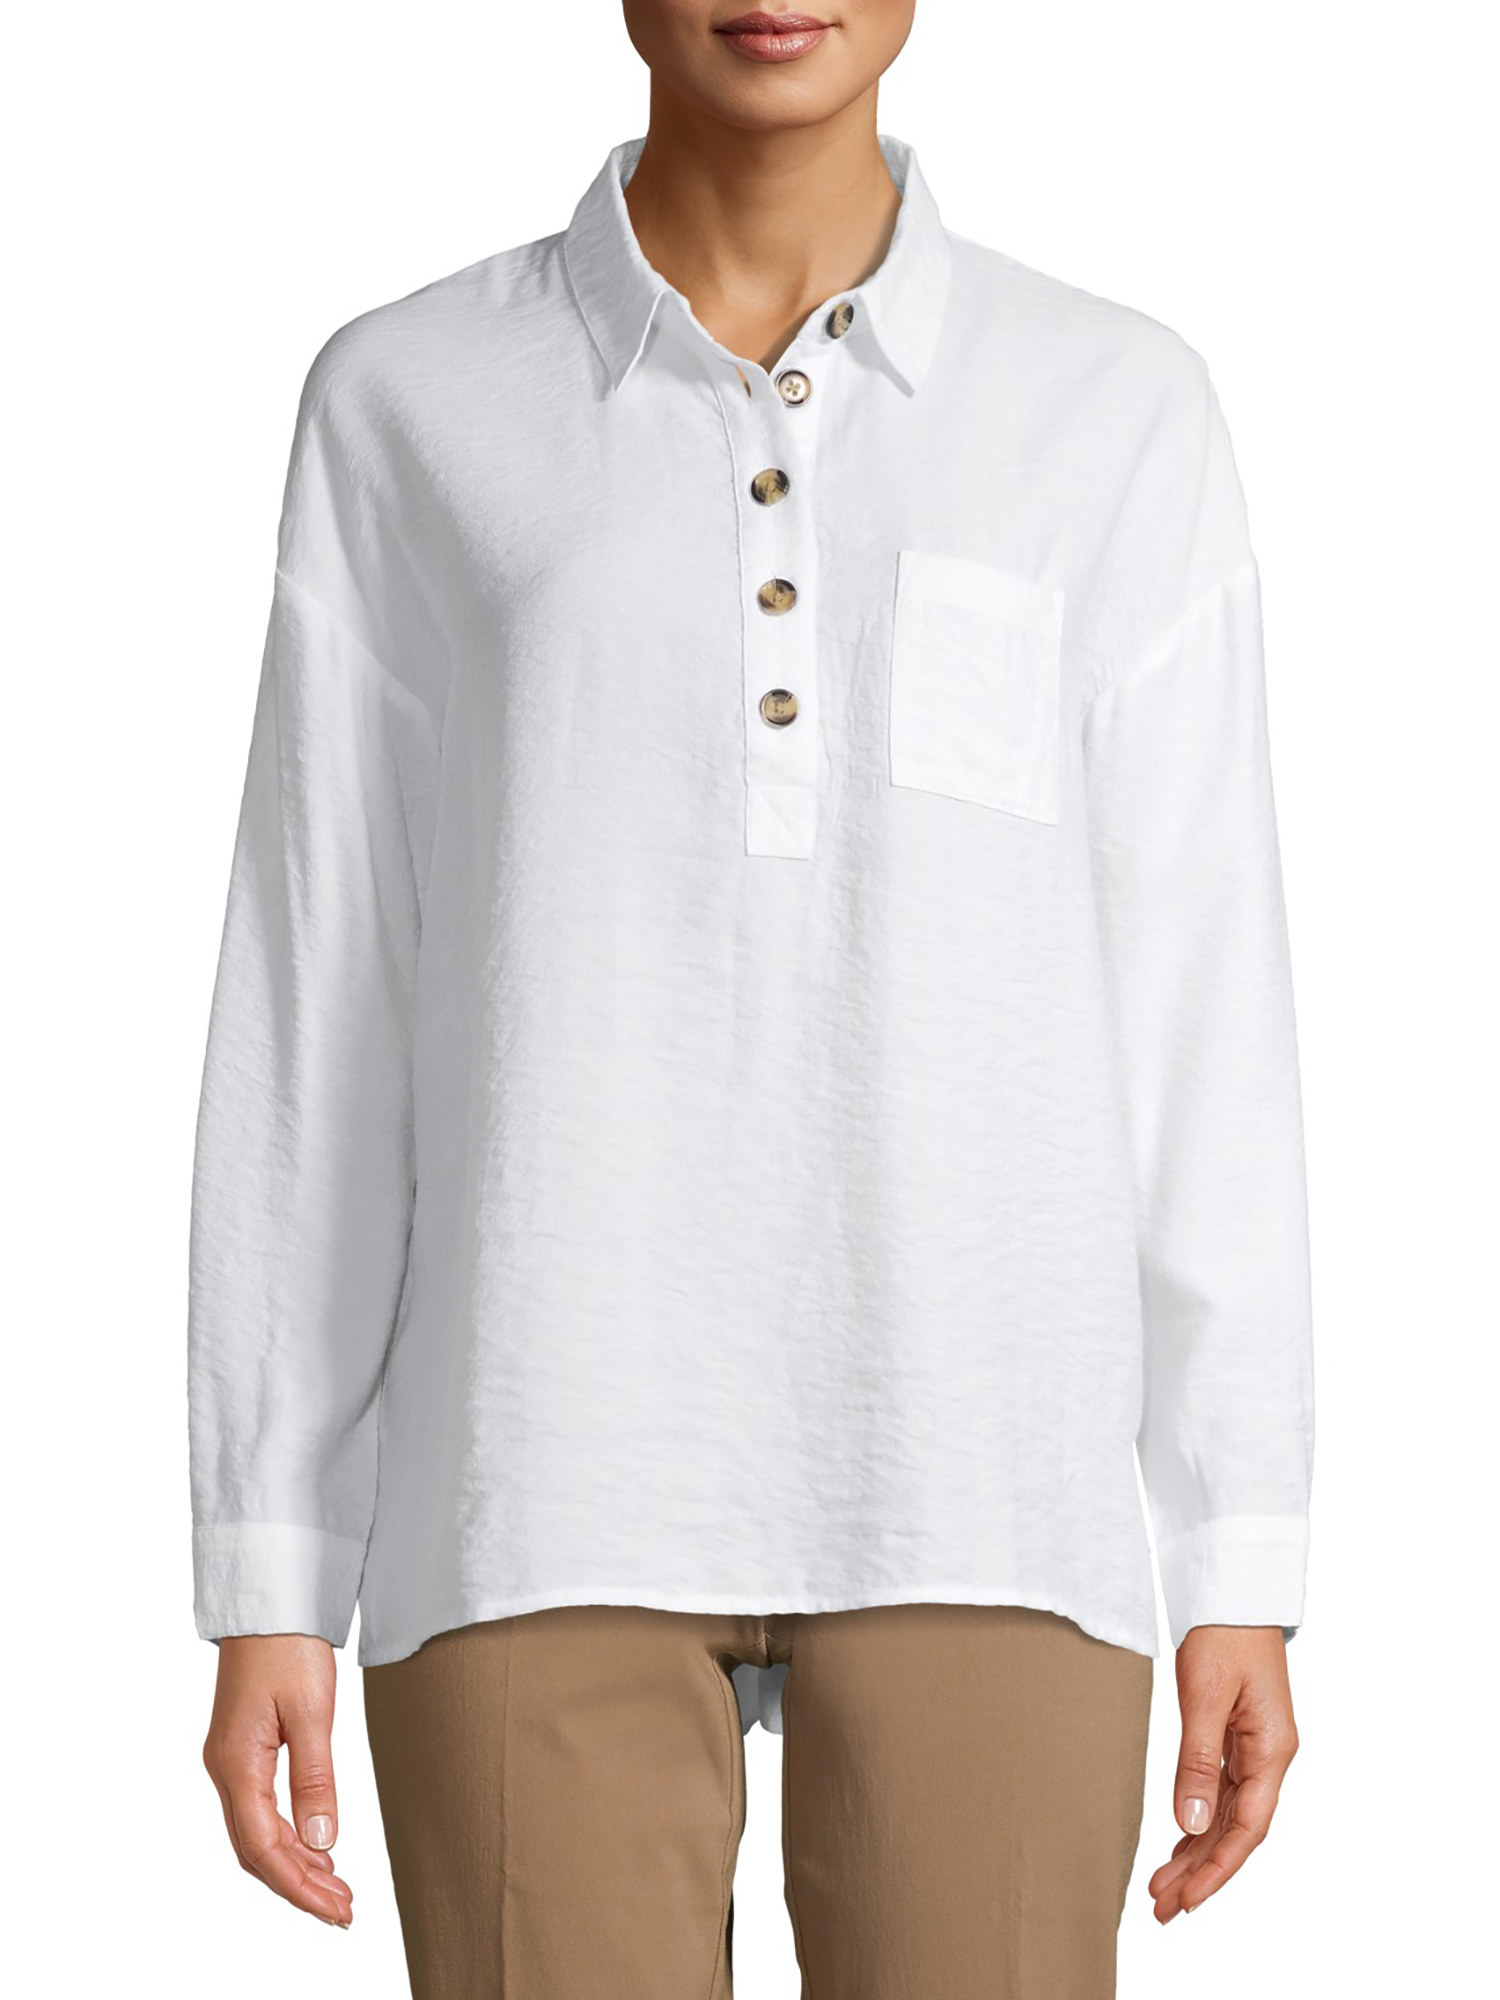 The white tunic with brown buttoned collar